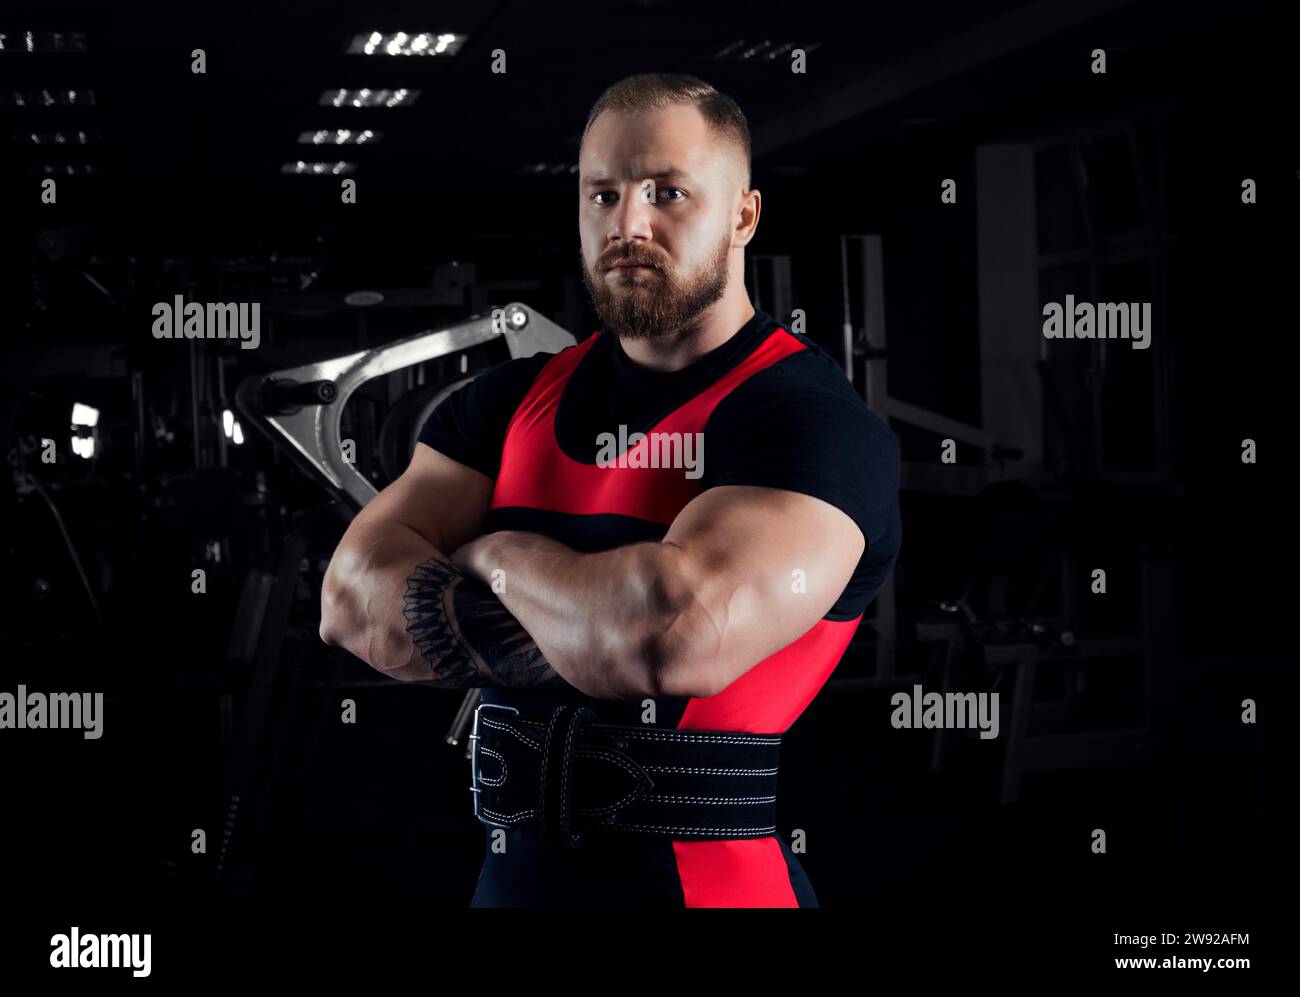 The weightlifter stands in a menacing pose with crossed huge arms and looks at the camera Stock Photo